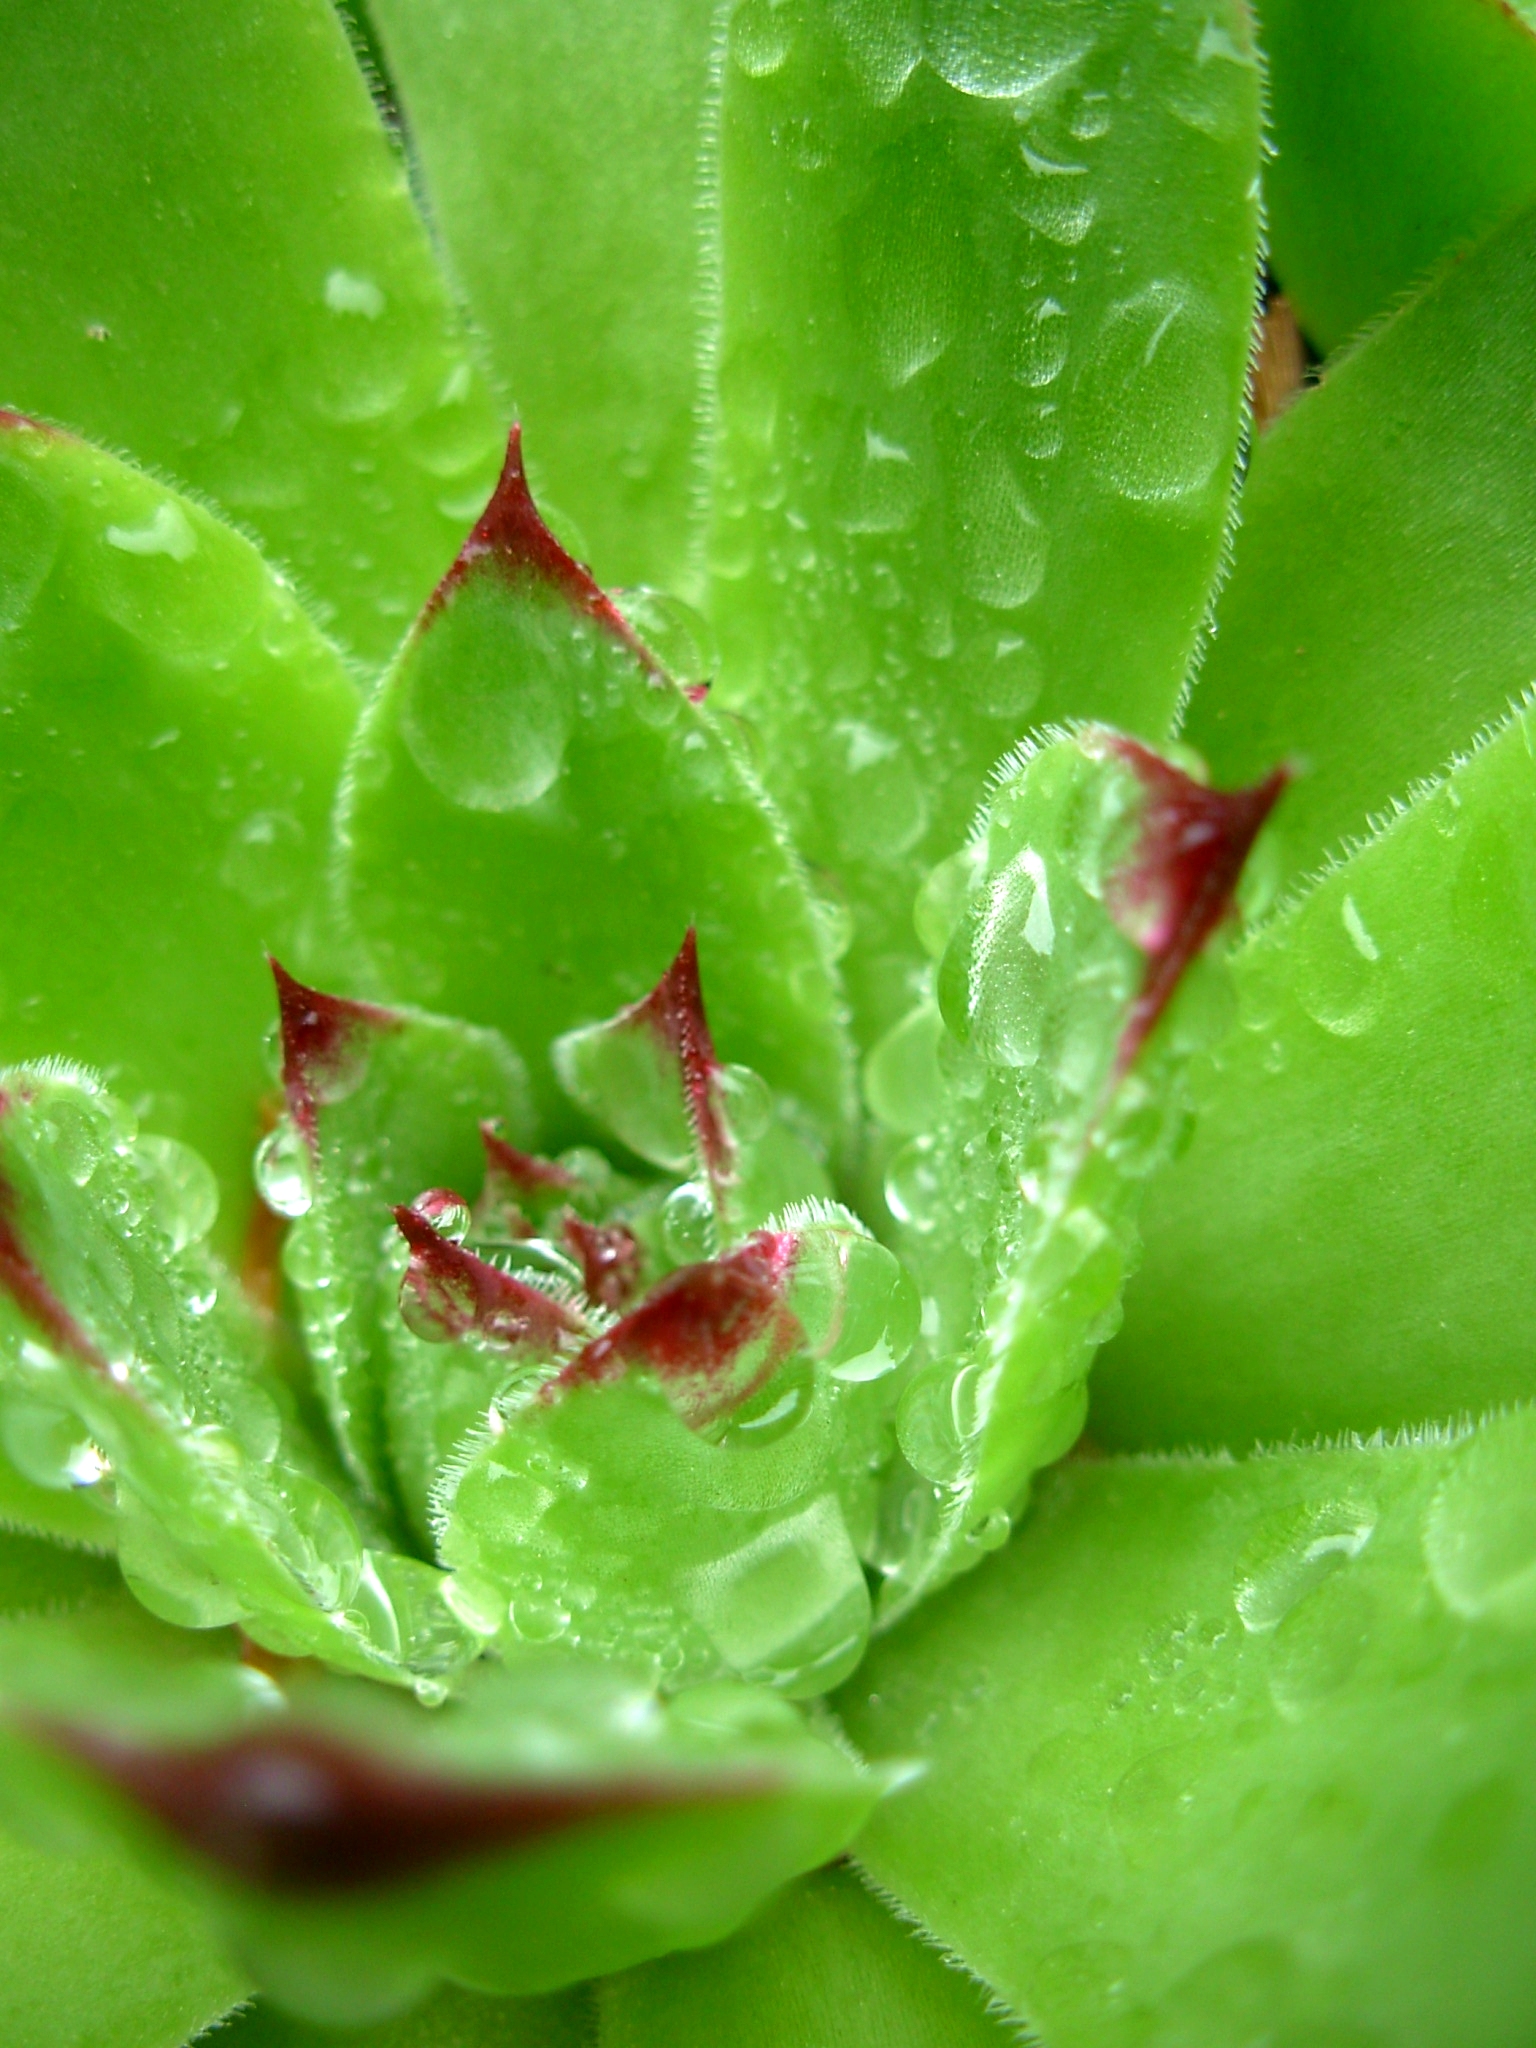 Hens And Chicks (user submitted)